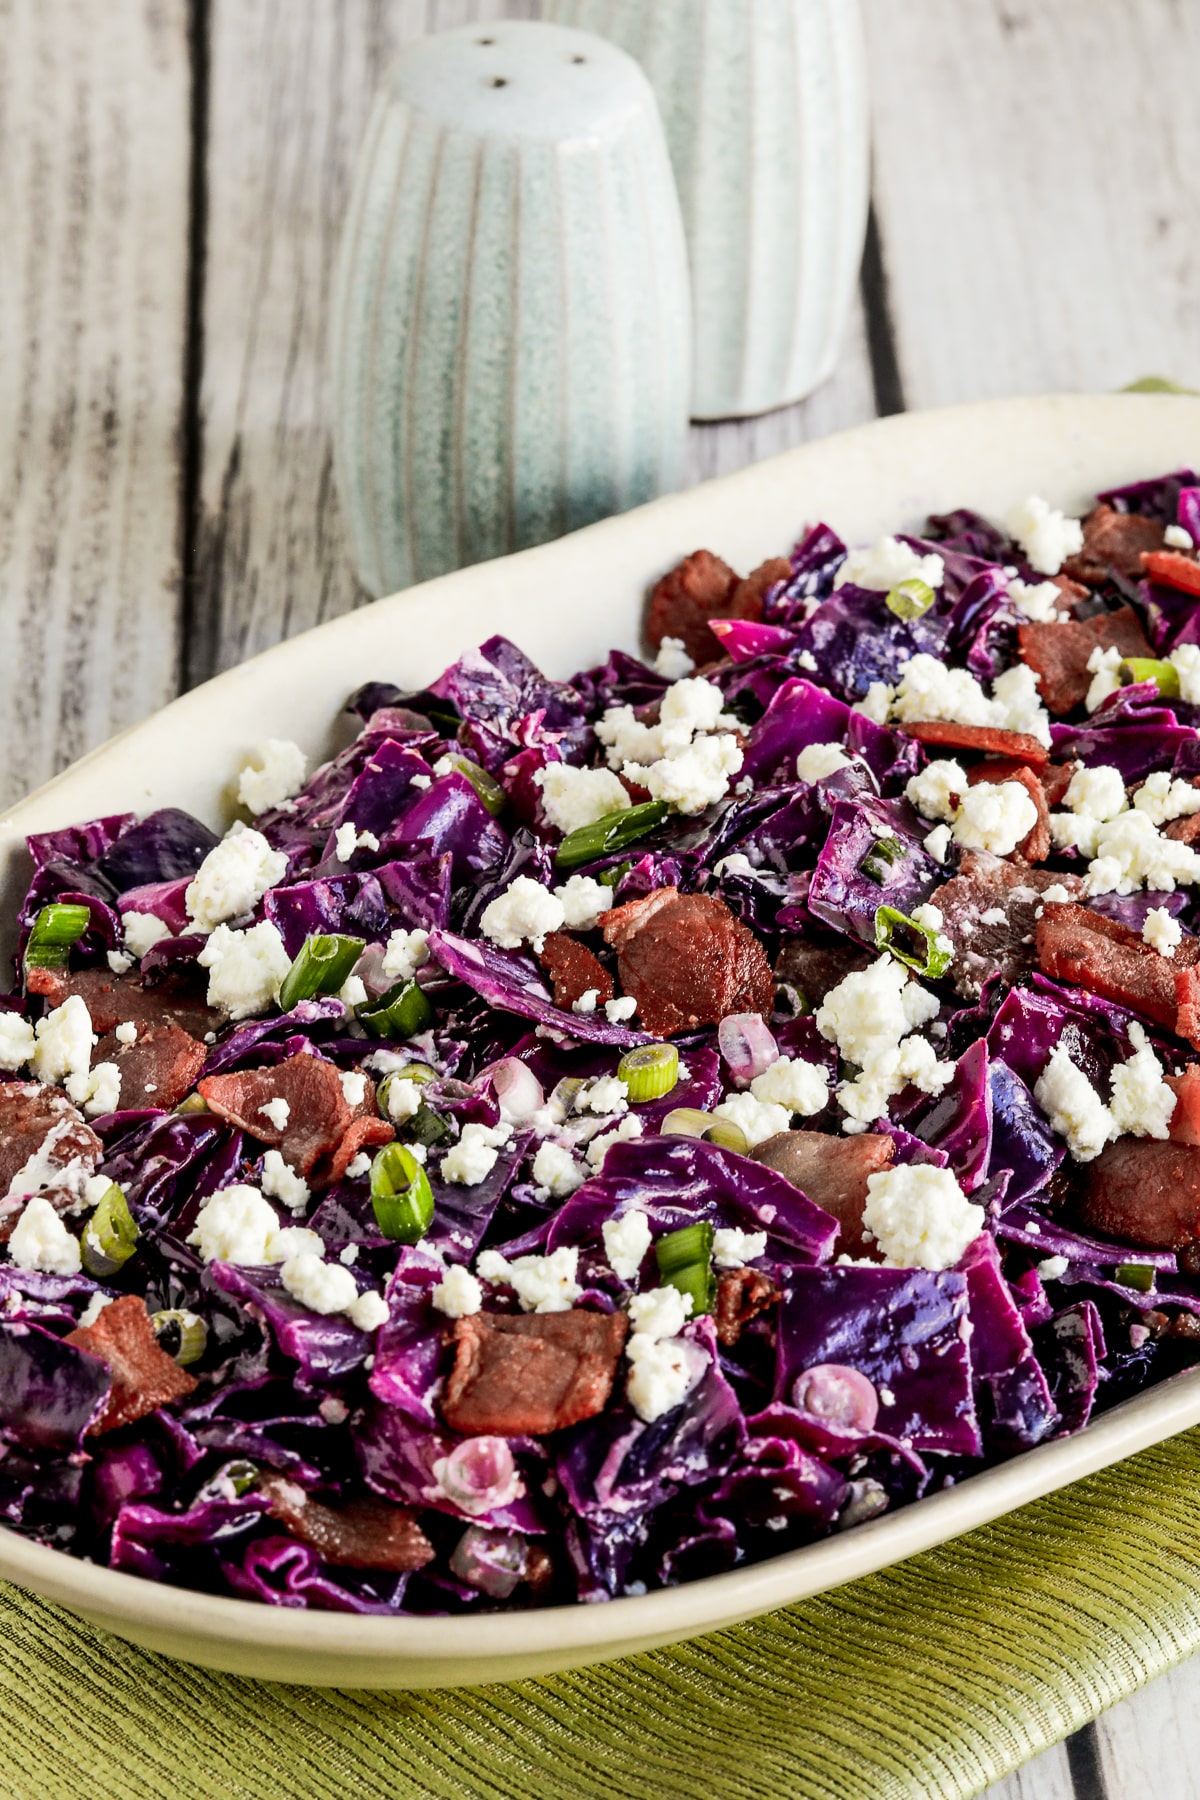 Red cabbage salad with bacon and goat cheese shown on a serving plate